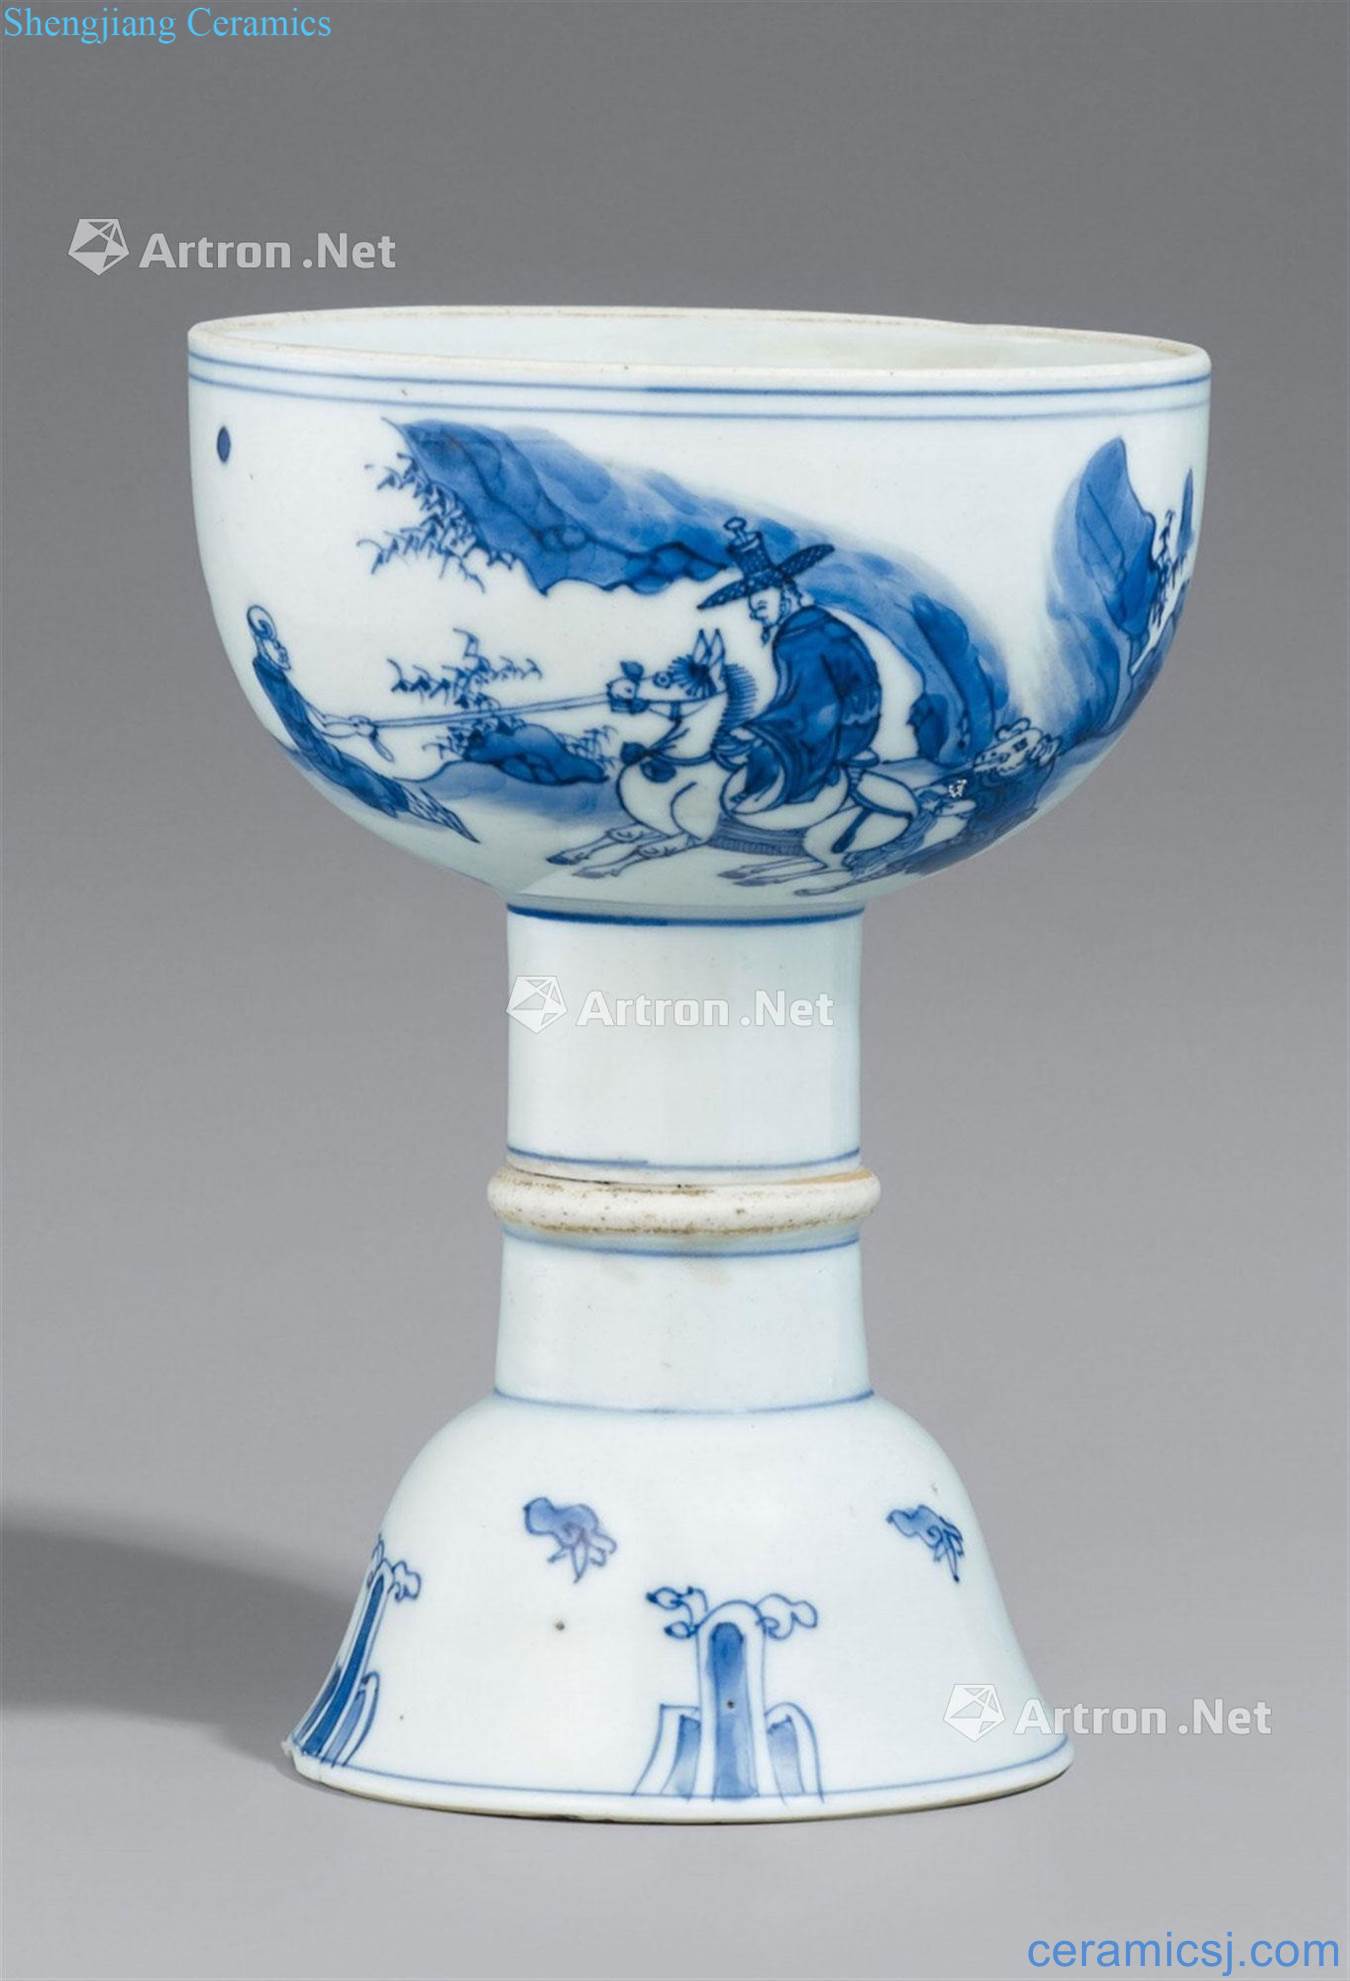 In the 17th century Blue and white figure best cup, journey to the west